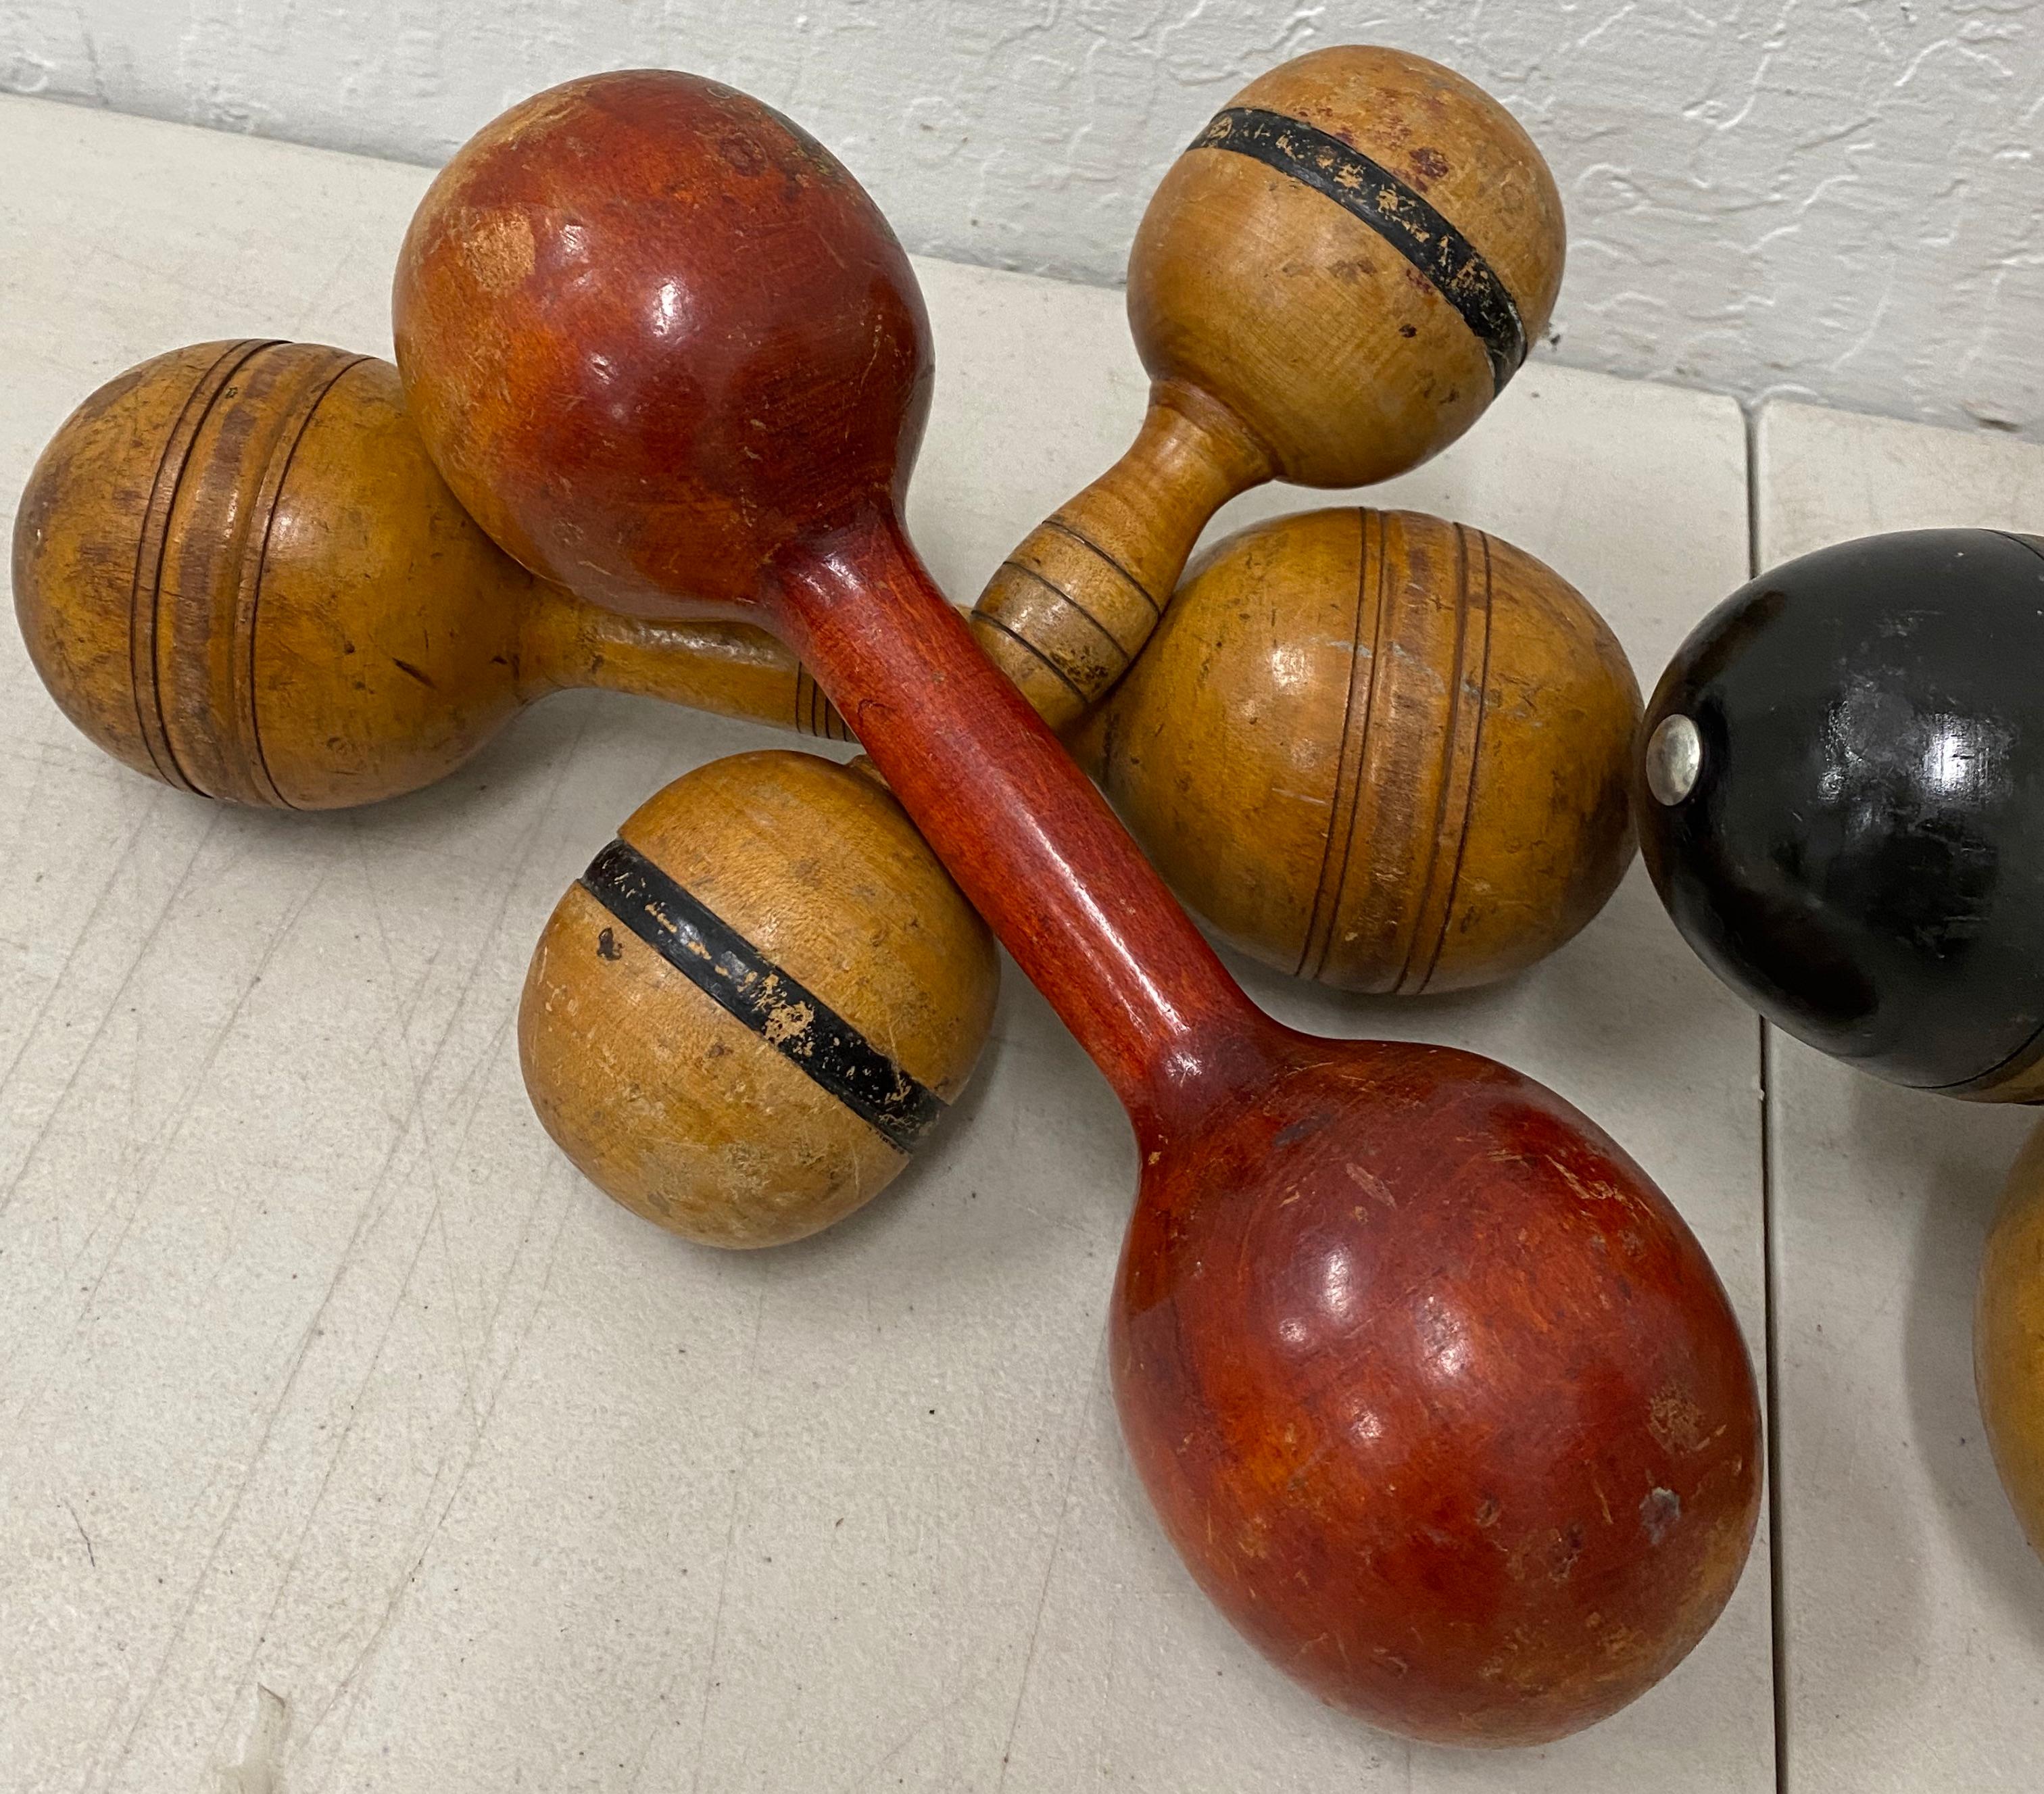 Set of six early 20th century wooden dumbbell exercise gym hand weight, circa 1930

Each dumbbell is weighted and ready to use for exercise or display

The longest dumbbell measures 10